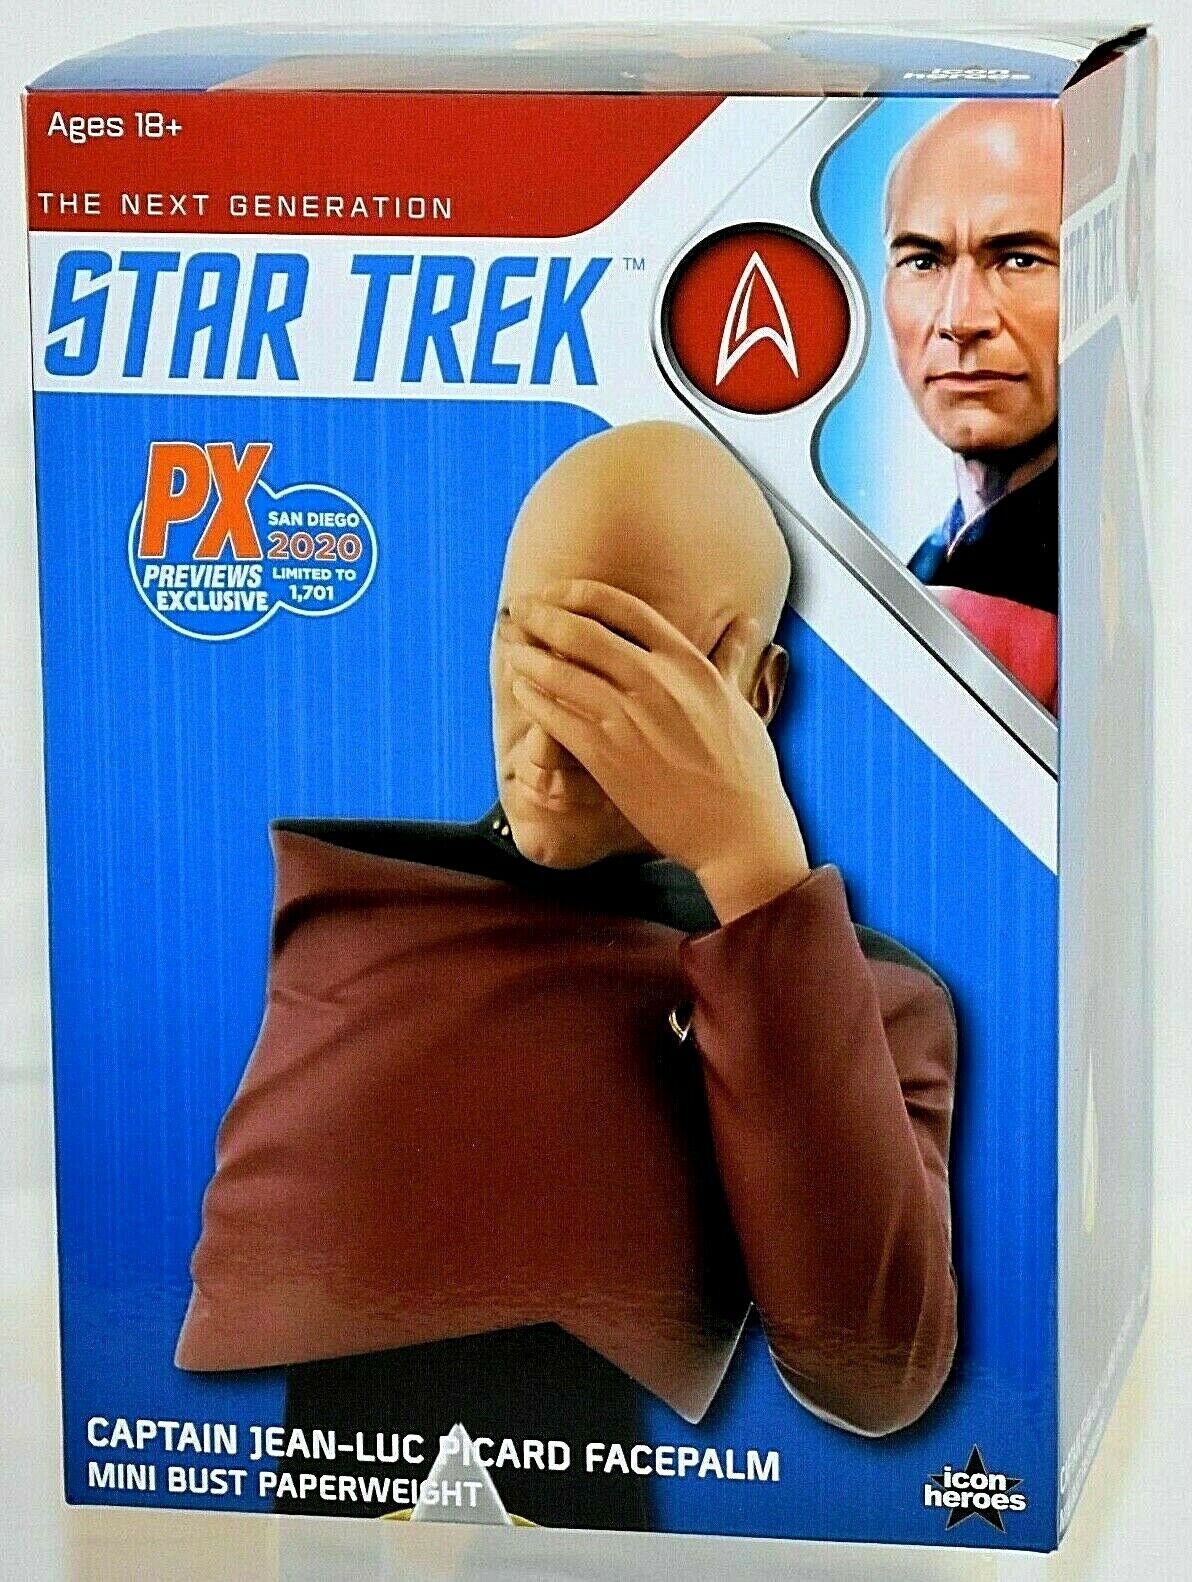 2020 Sdcc Star Trek The Next Generation Facepalm Picard 8" Bust/statue 1701 Only